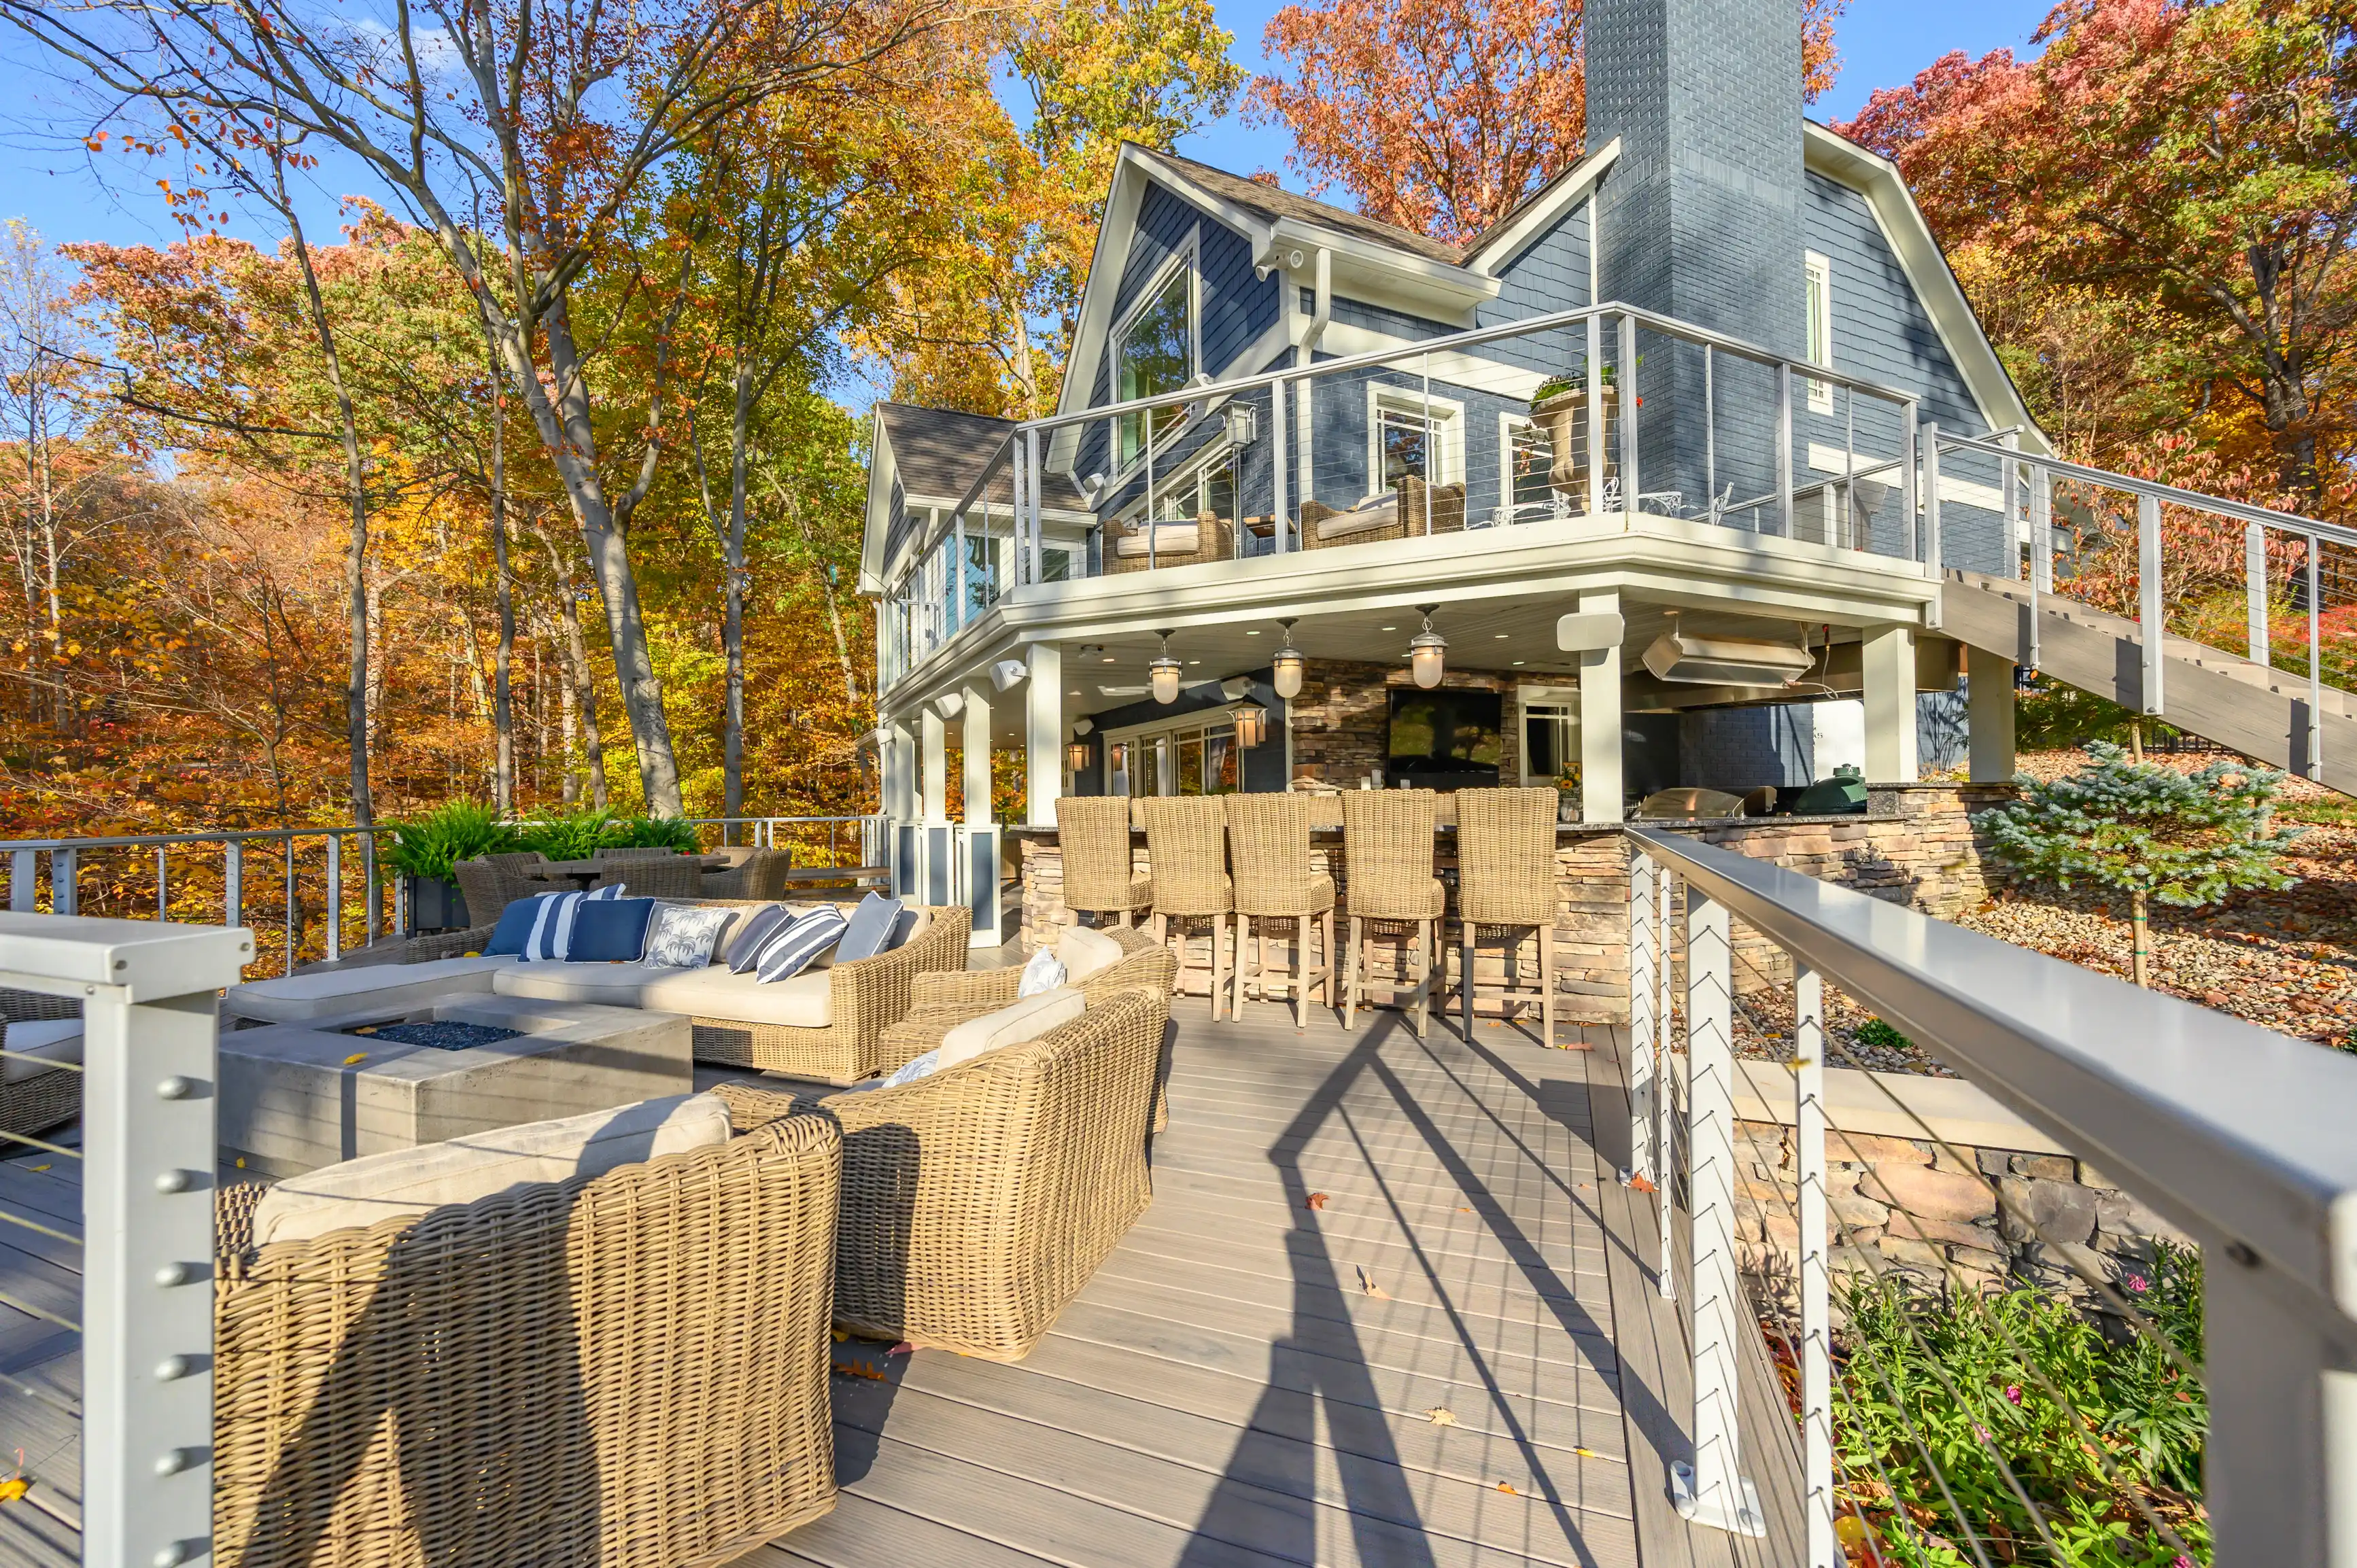 Spacious deck area with outdoor furniture in front of a two-story house with autumn-colored trees in the background.